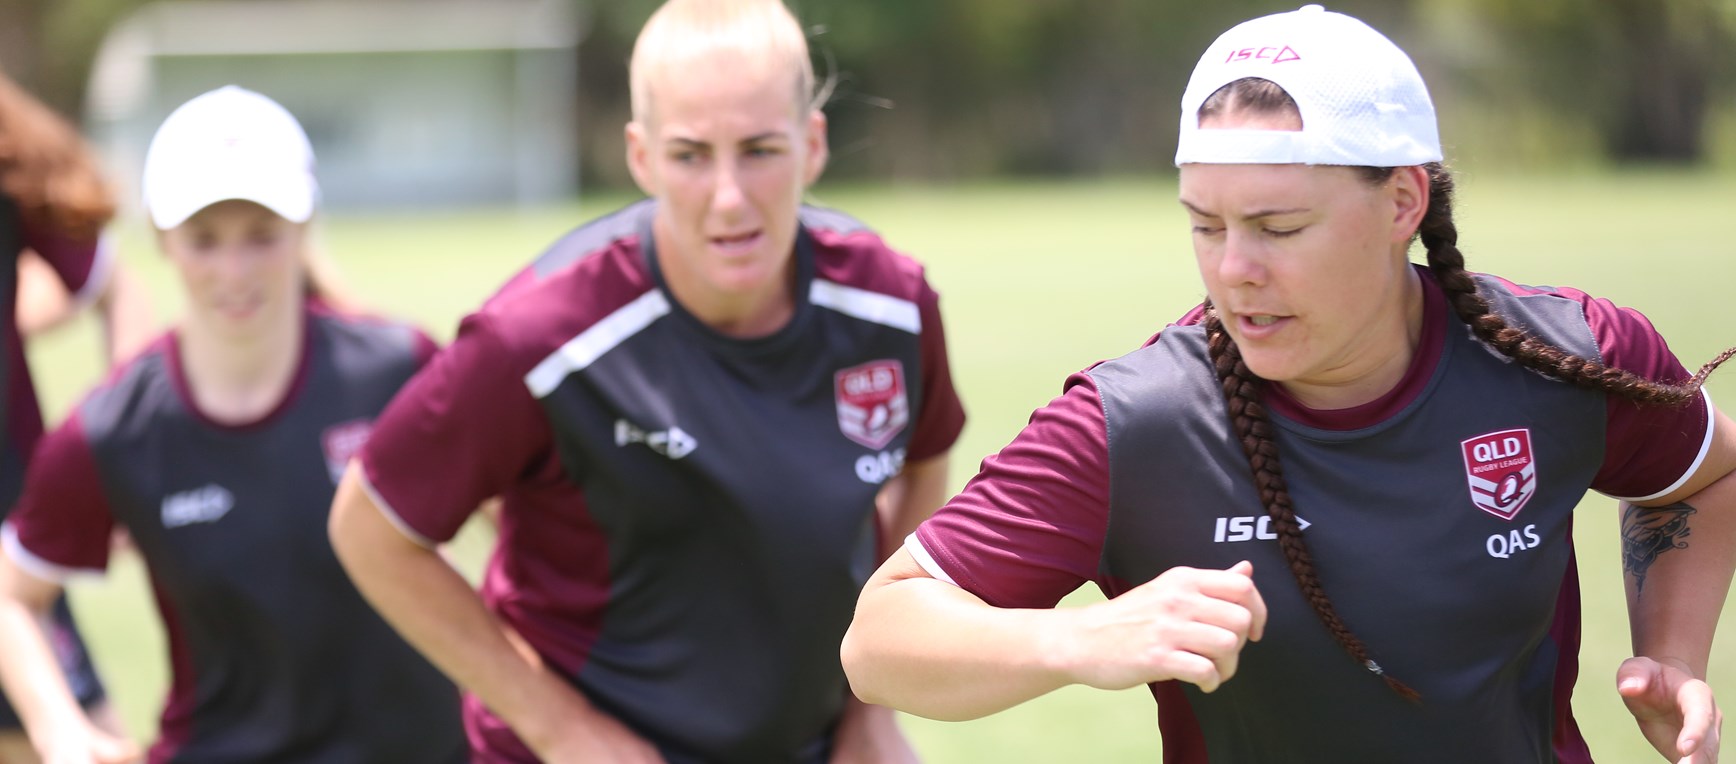 In pictures: testing day for Queensland hopefuls